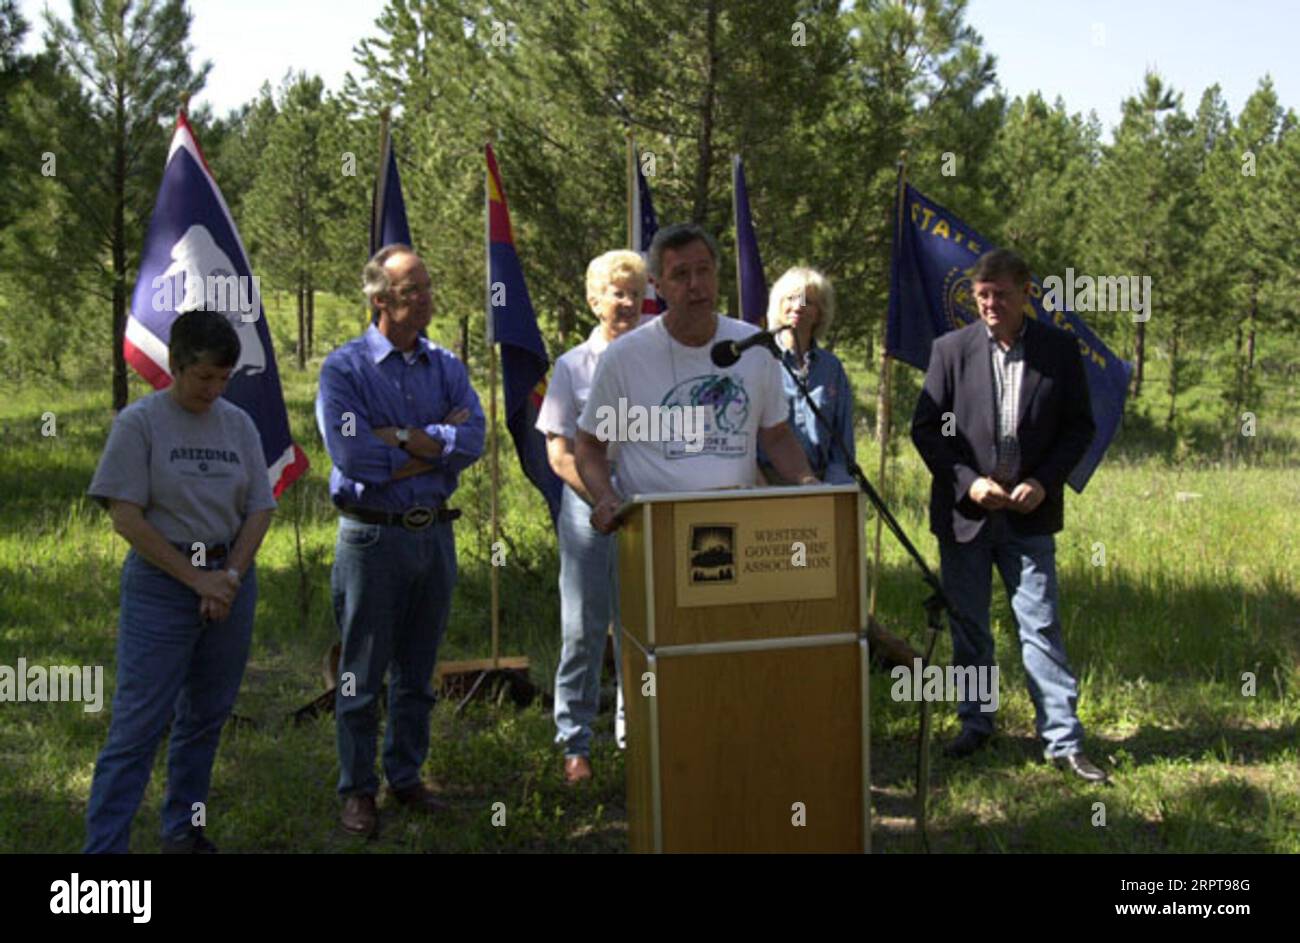 Speech by Forest Service Chief Dale Bosworth, with Arizona Governor Janet Napolitano, Idaho Governor Dirk Kempthorne, Montana Governor Judy Martz, Secretary Gale Norton, Wyoming Governor Dave Freudenthal behind, left to right, at Western Governors' Association Forest Summit, Missoula, Montana Stock Photo